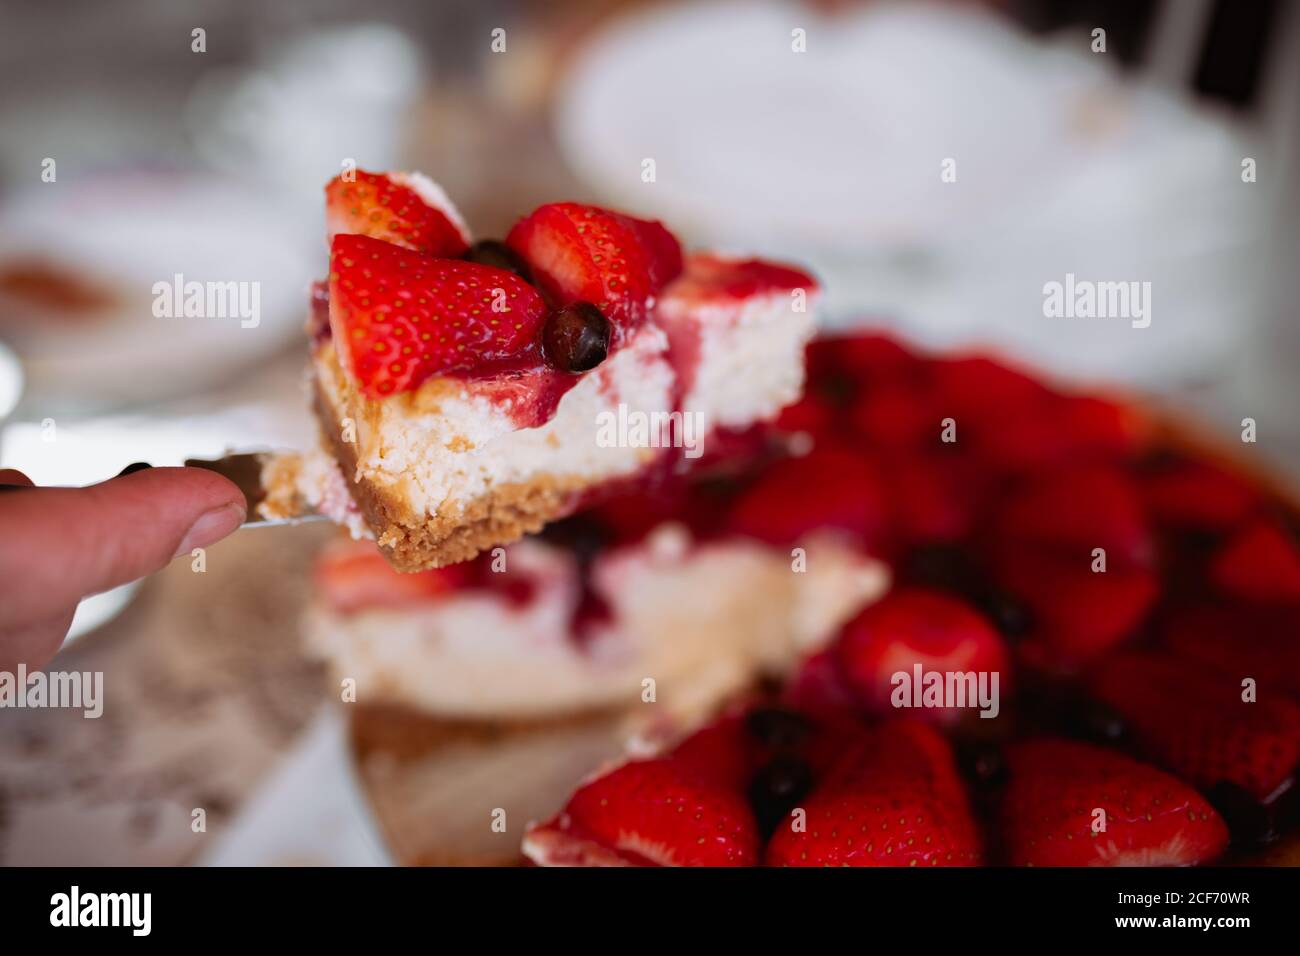 Woman hand cutting strawberry cake with knife Stock Photo